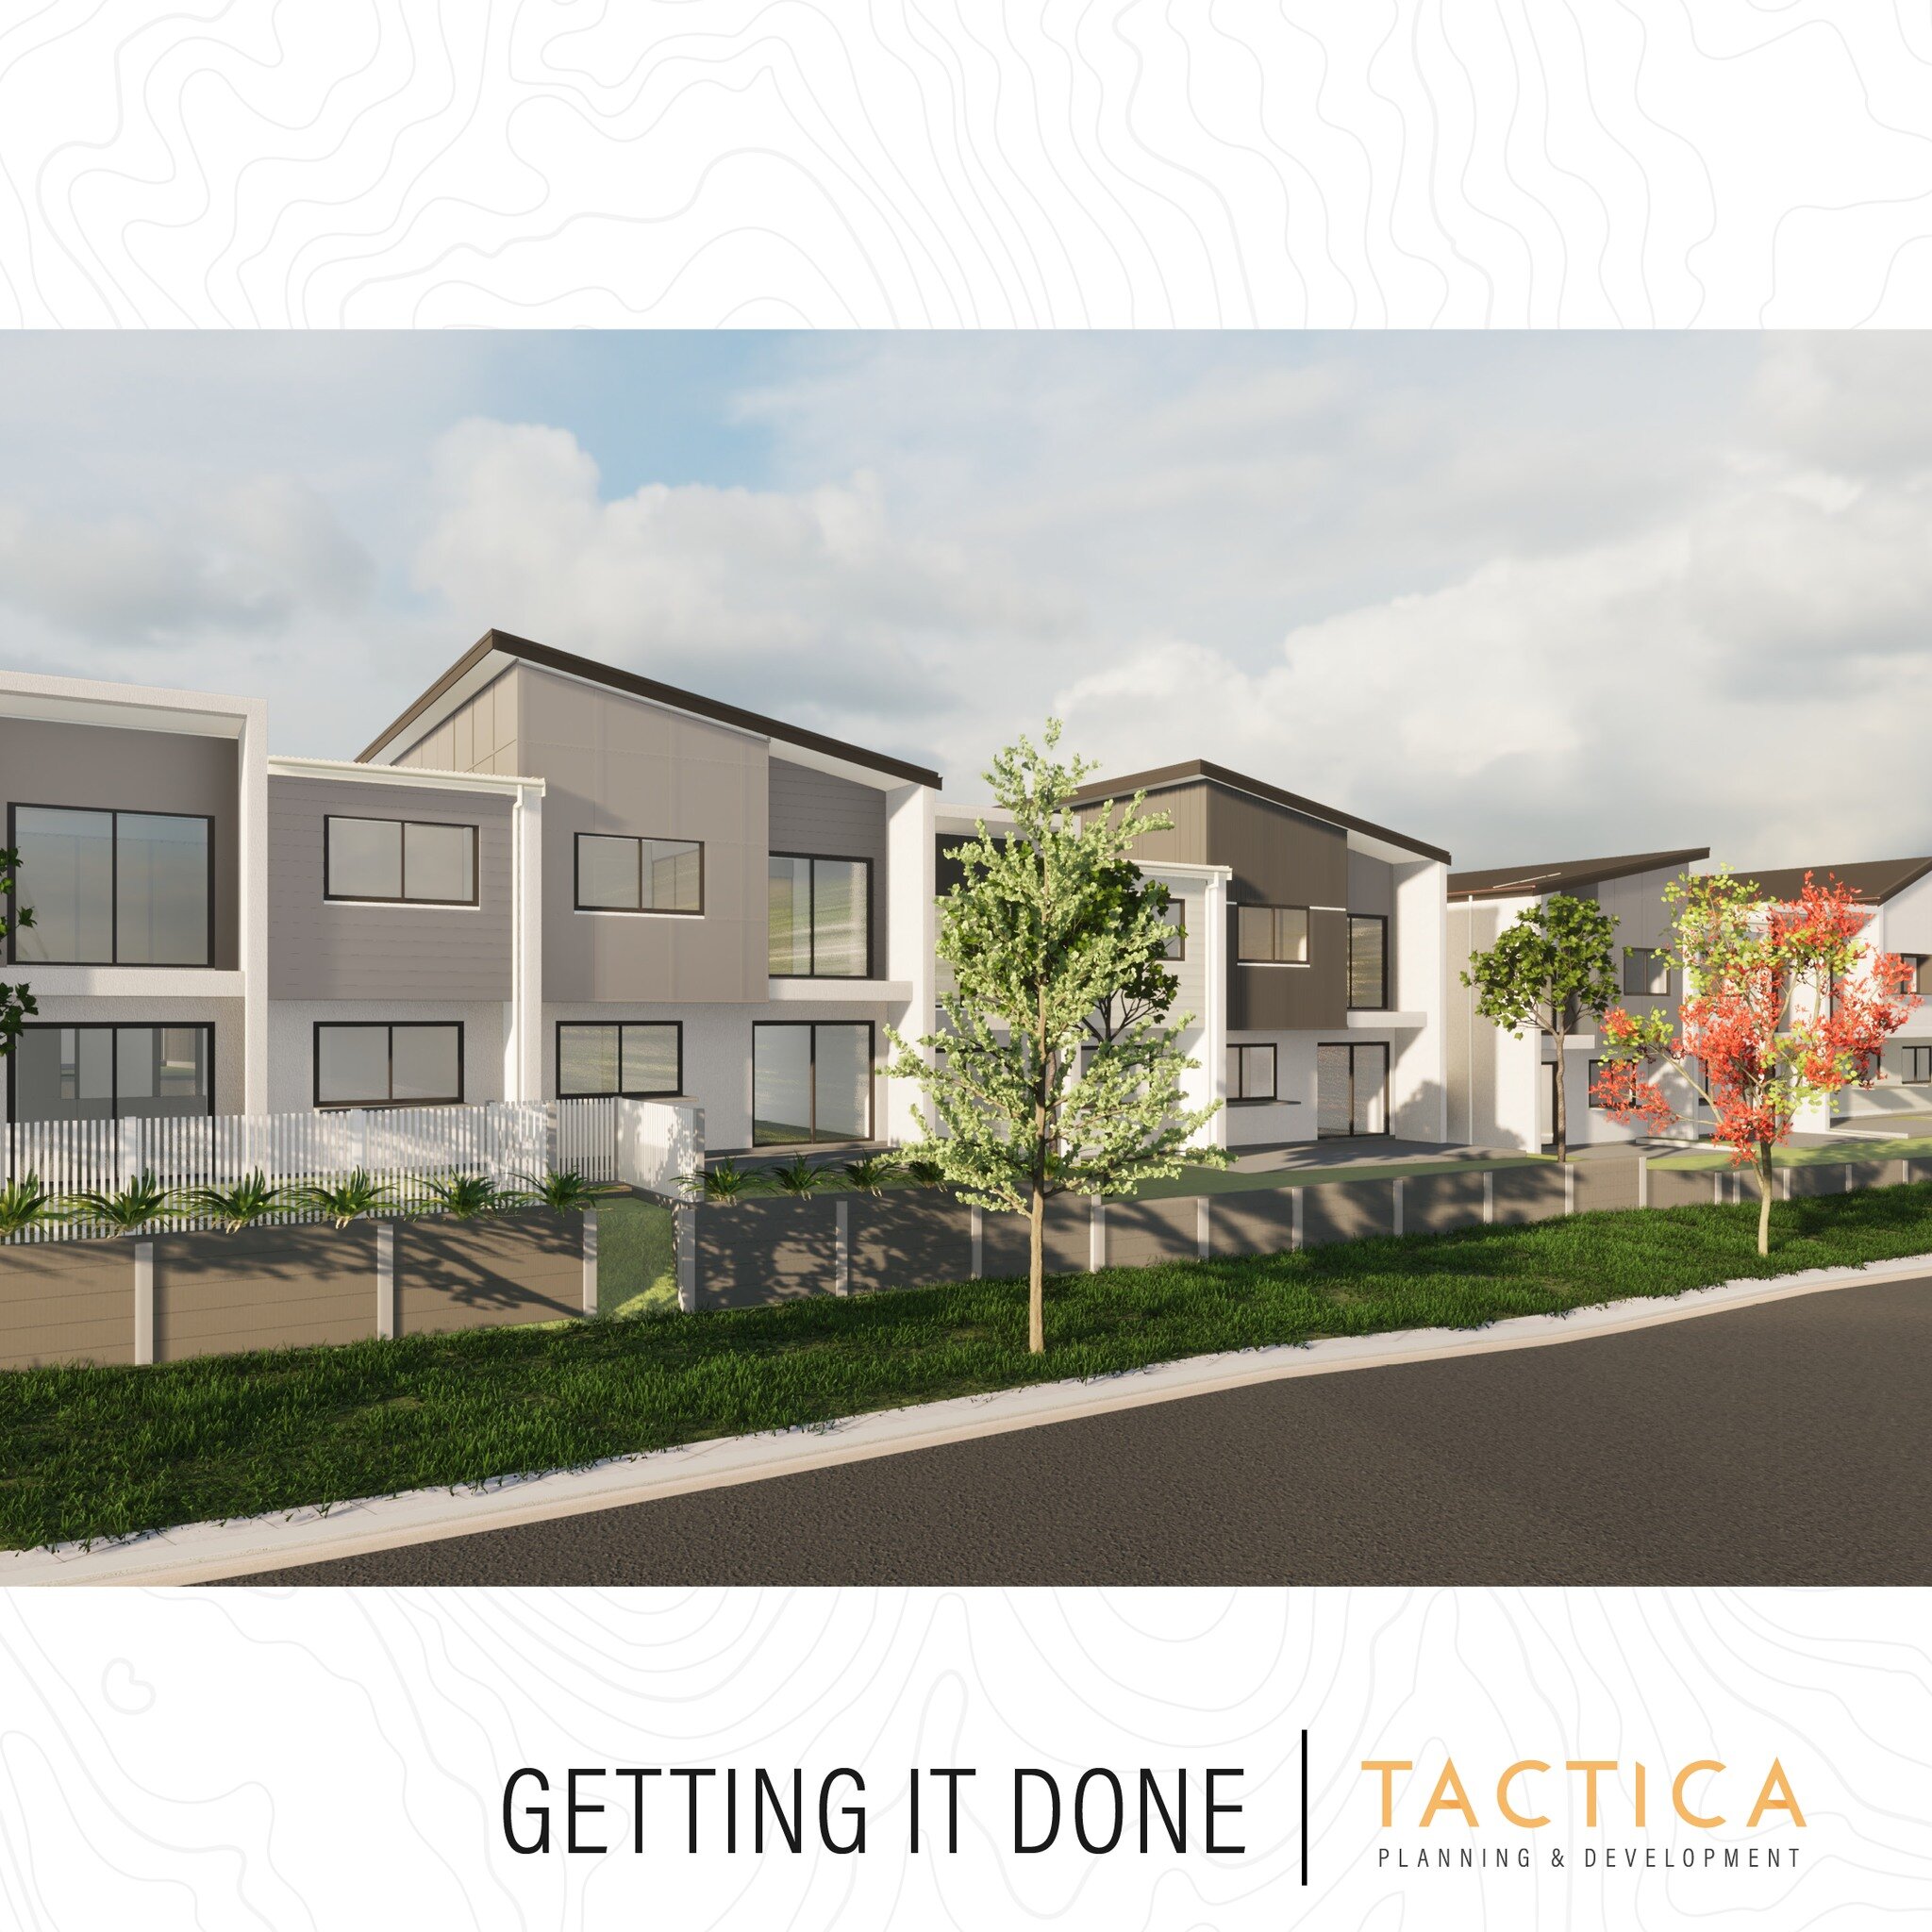 Getting it done. Some projects aren&rsquo;t straight-forward, but we slogged it out and we are happy to say now 50 Townhouses on the way. Great work all round.
.
#tacticaplan #planning #townhouse #goldcoast #tacticaplanning&amp;development #townplann